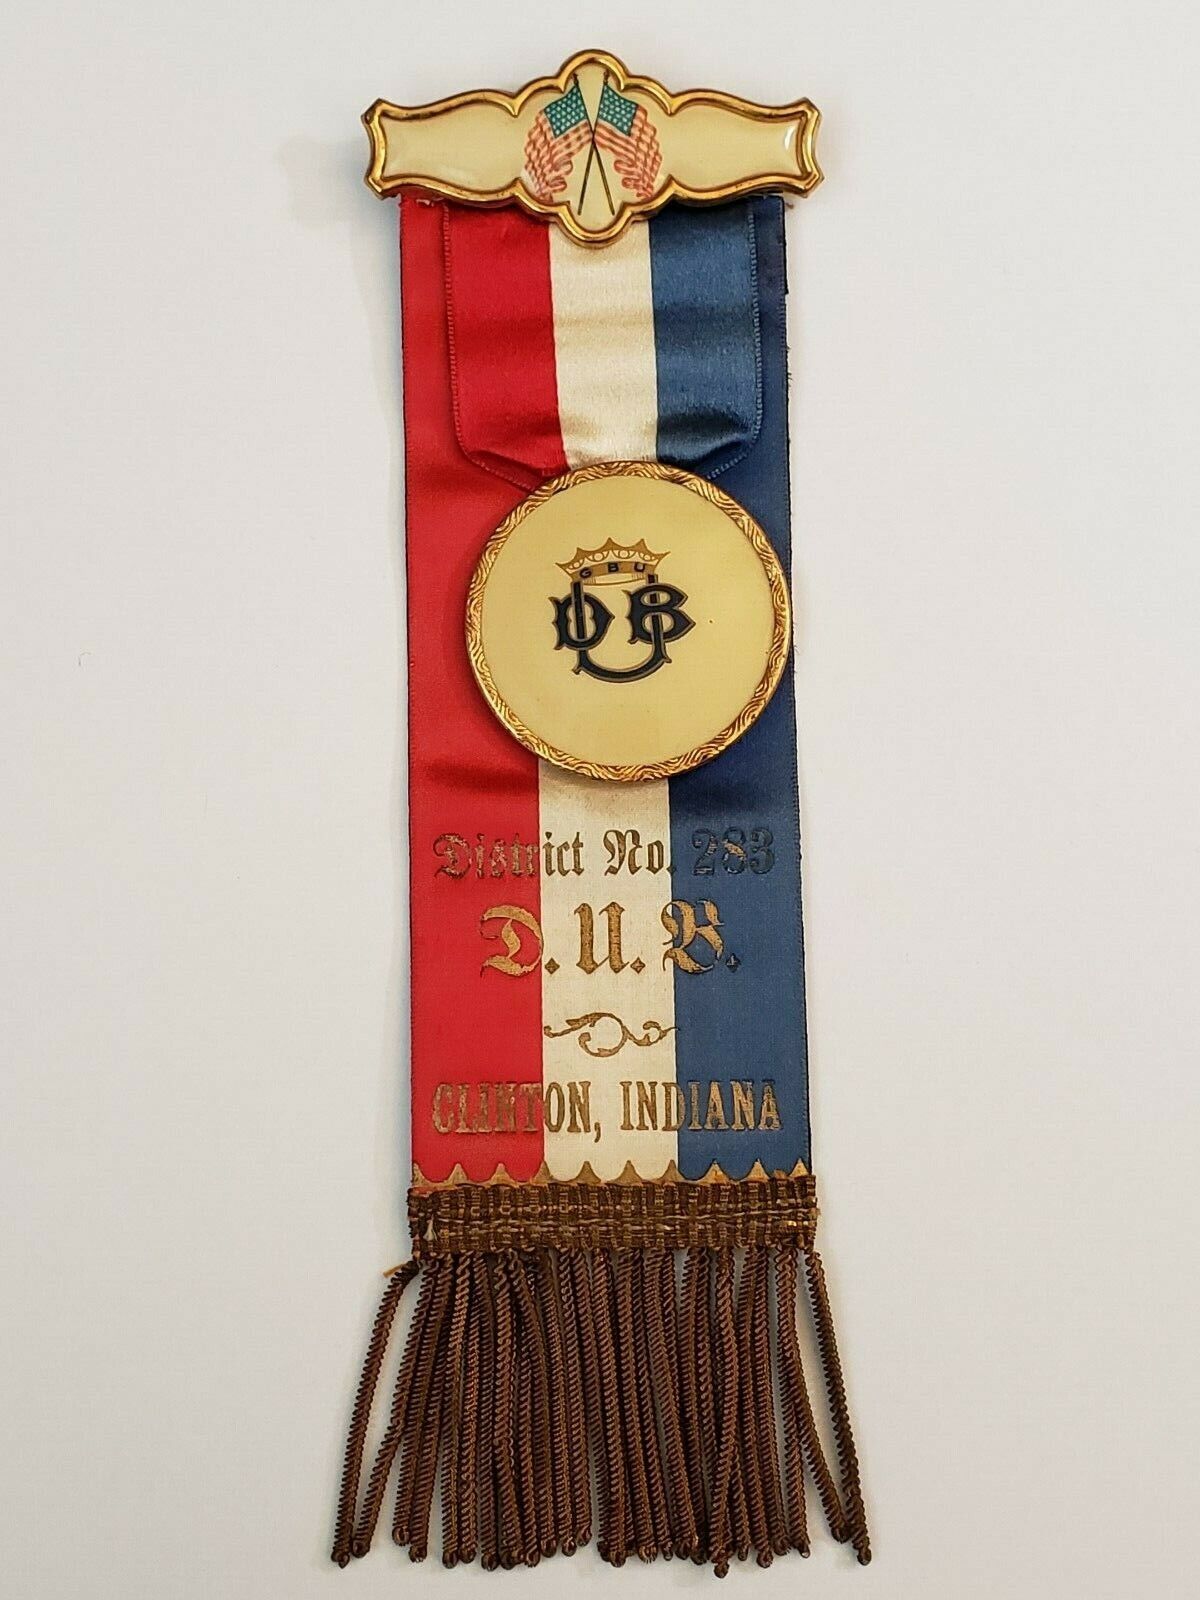 Greater Beneficial Union GBU DUB District 283 Clinton Indiana Badge Medal Ribbon